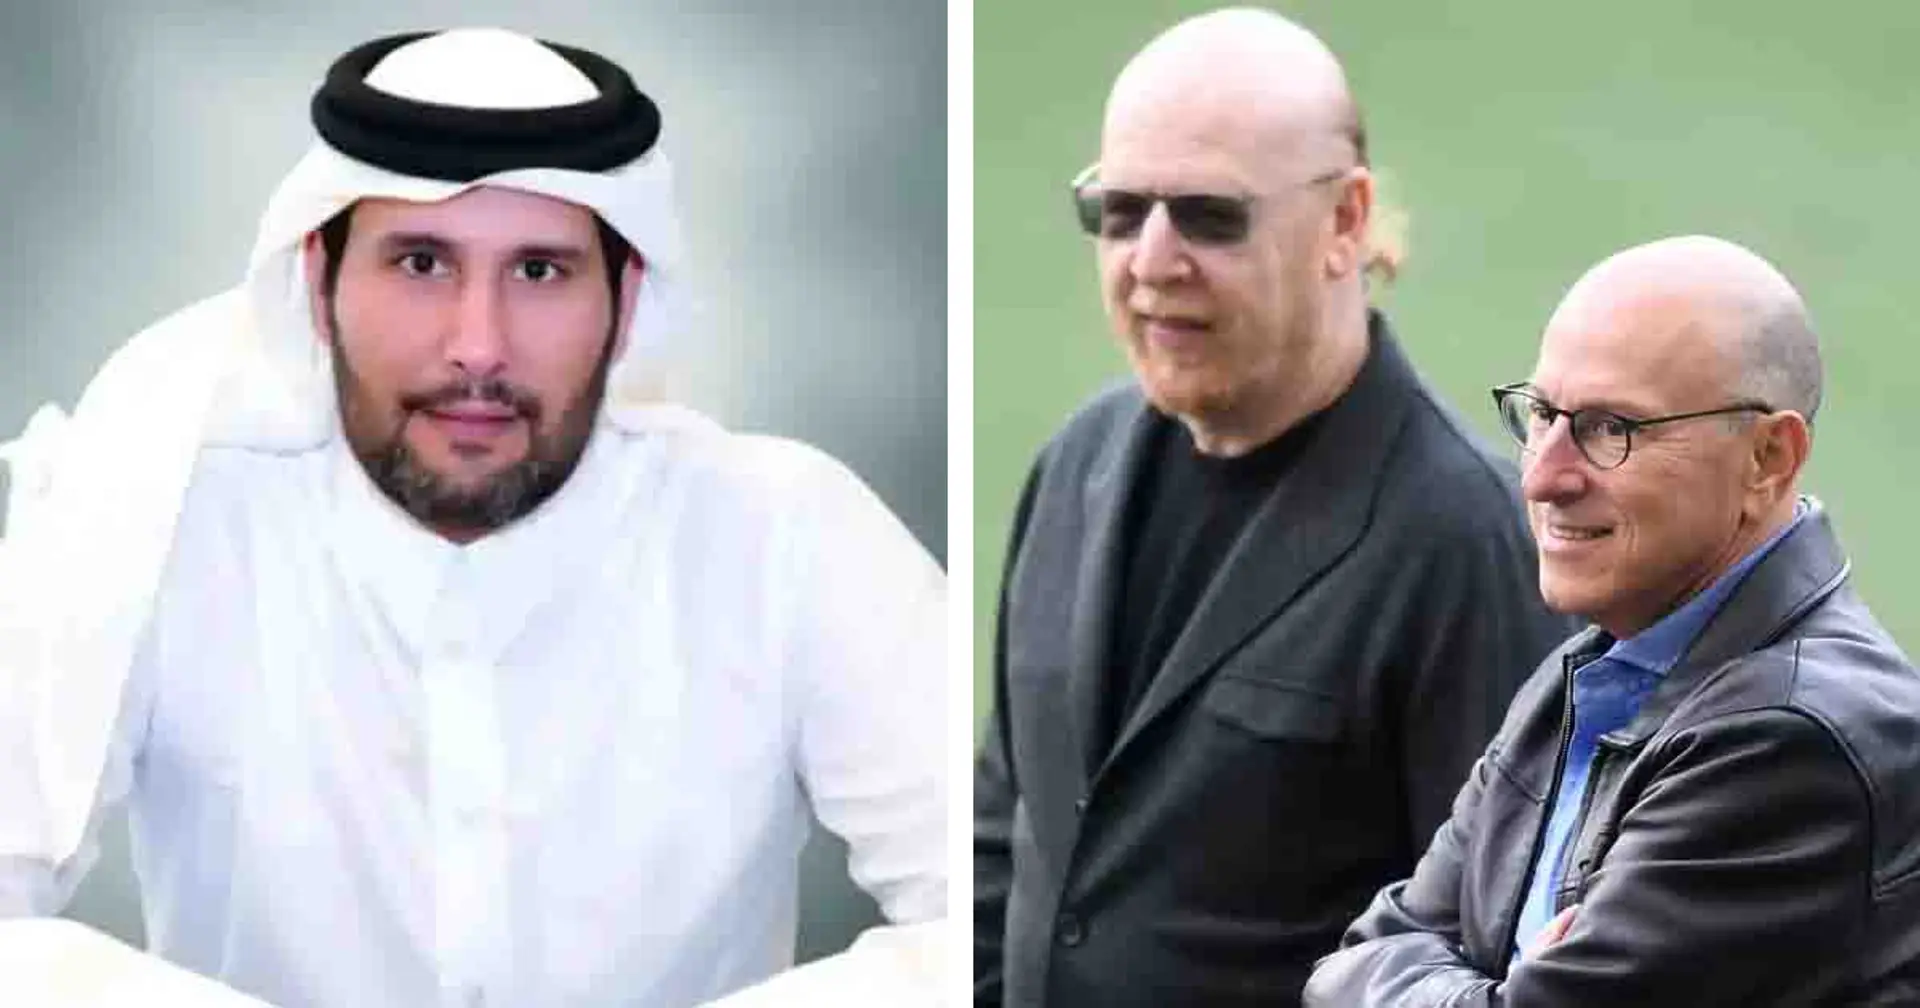 'This is a joke': Sheikh Jassim's feelings on delay over Man United takeover process revealed